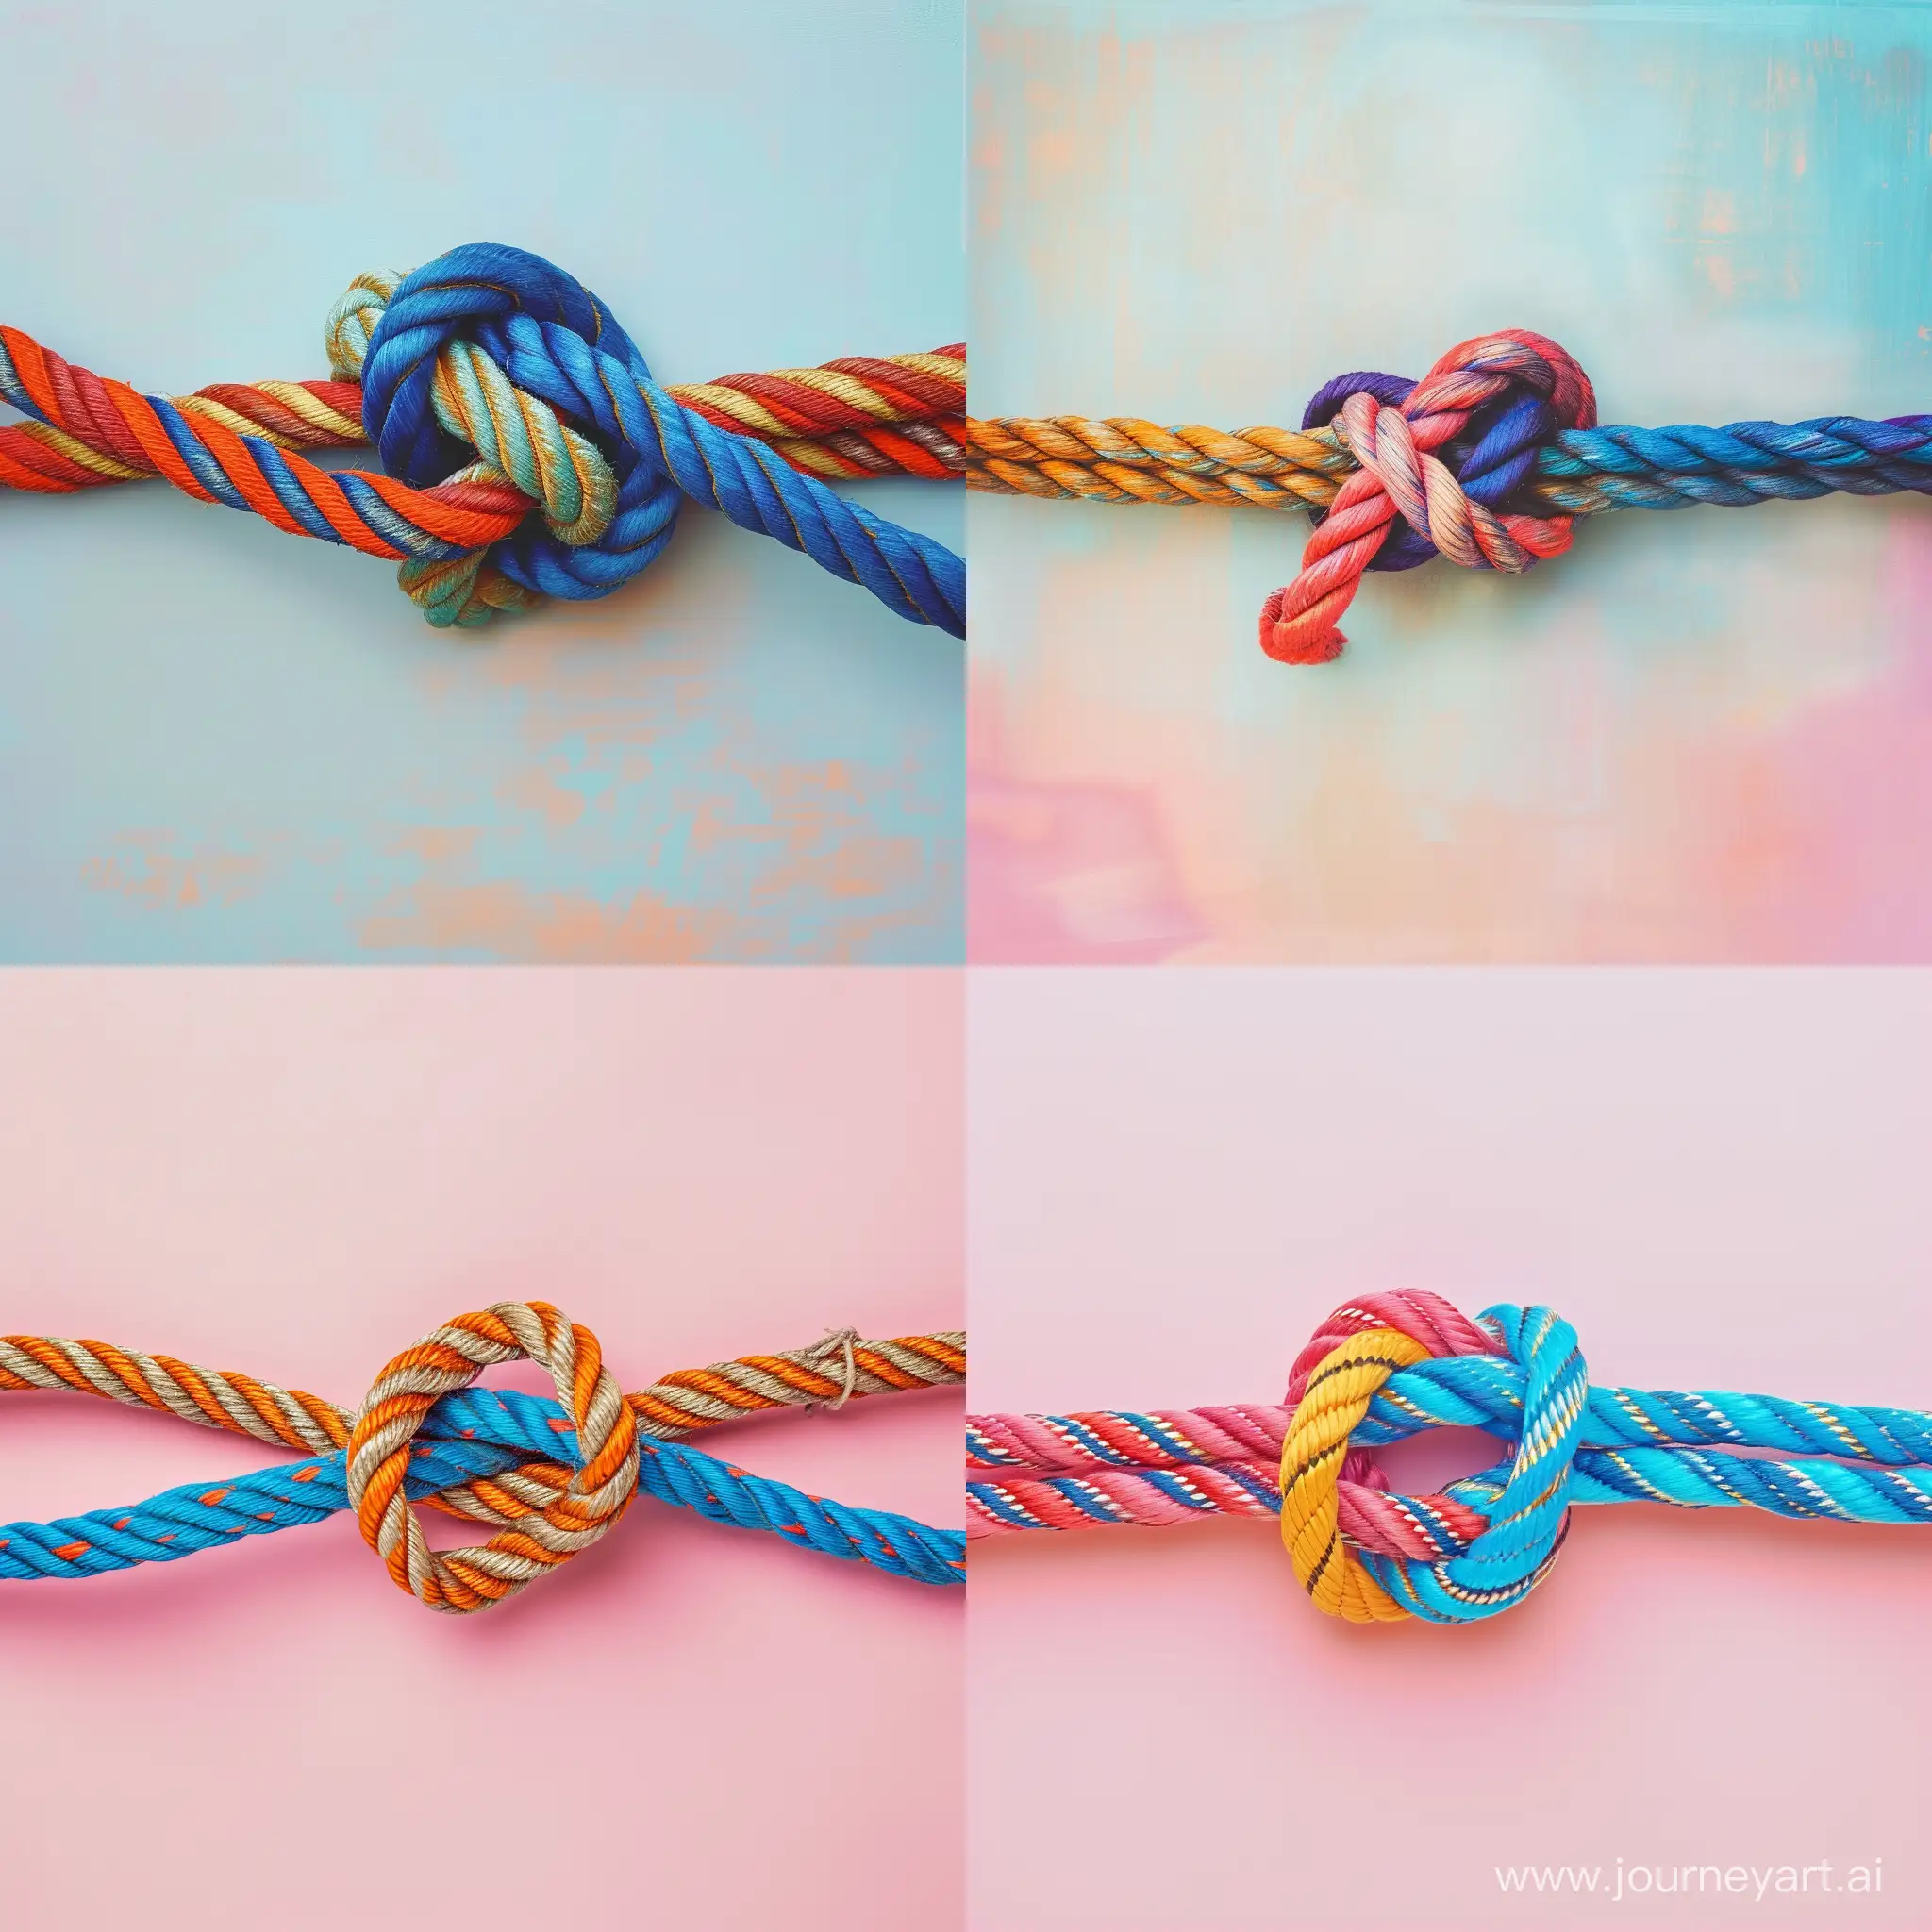 Vibrant-Knot-Colorful-Ropes-Tied-in-Harmony-on-a-Light-Pastel-Background